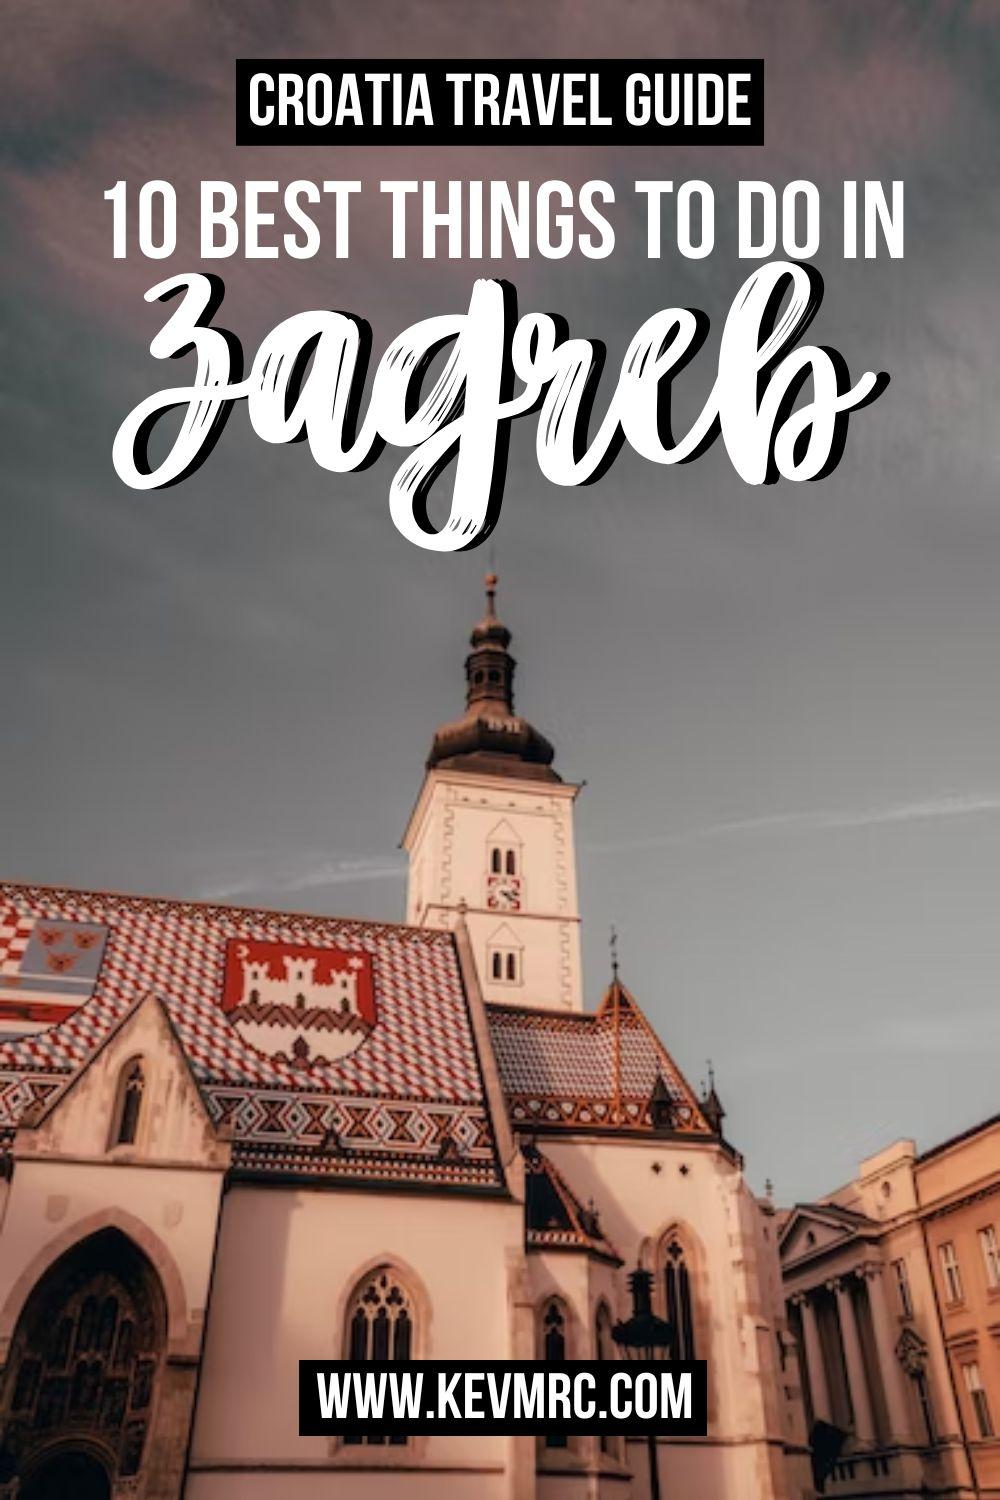 Going to Zagreb on a budget? Save money while traveling Croatia's capital city thanks to these 10 best free things to do in Zagreb. best things to do in zagreb | things to do in zagreb croatia #zagreb #croatia